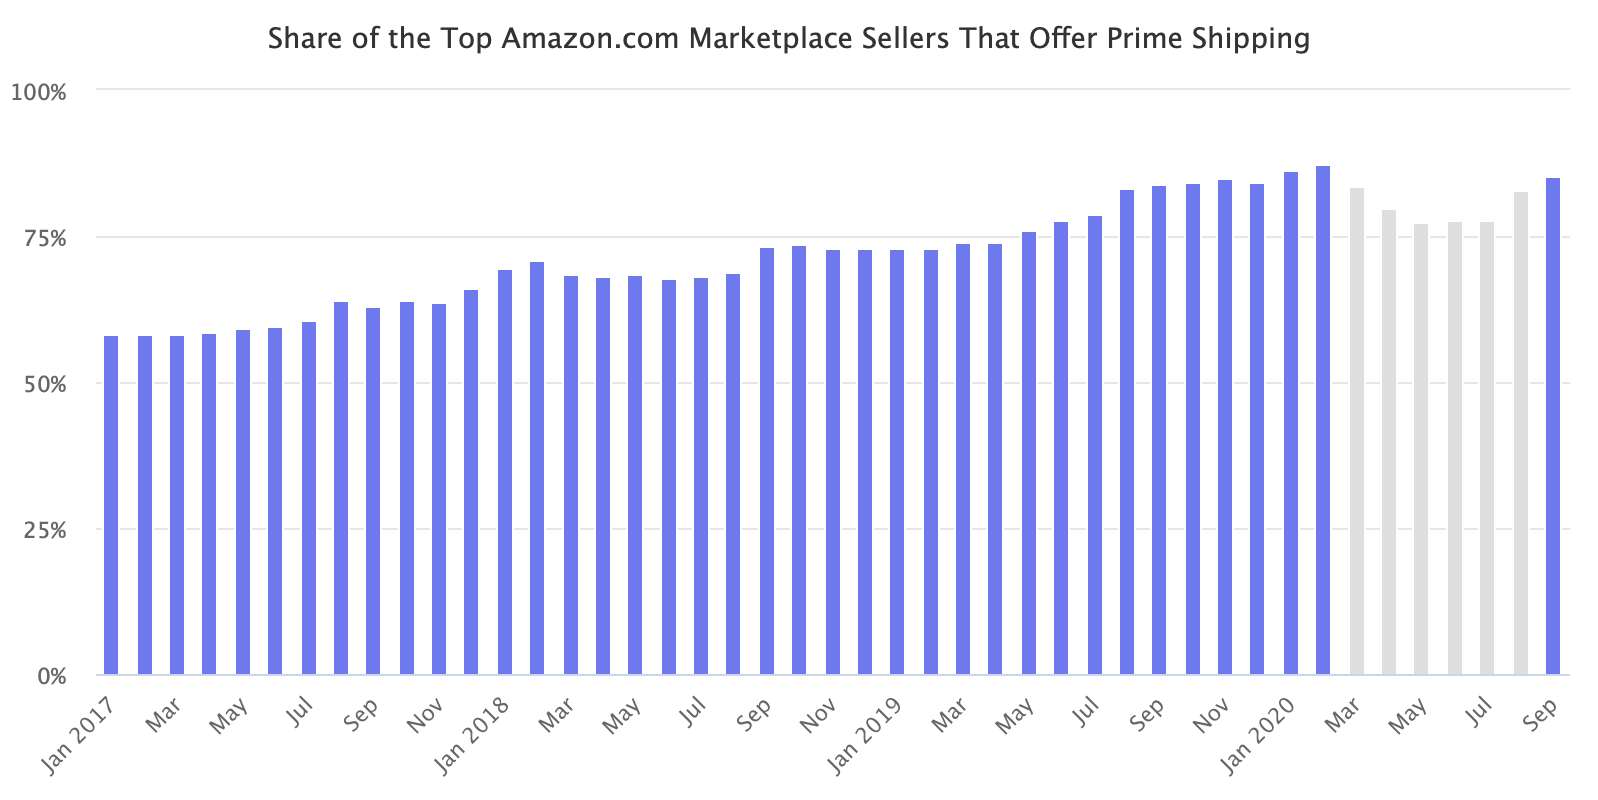 Share of the Top Amazon.com Marketplace Sellers That Offer Prime Shipping